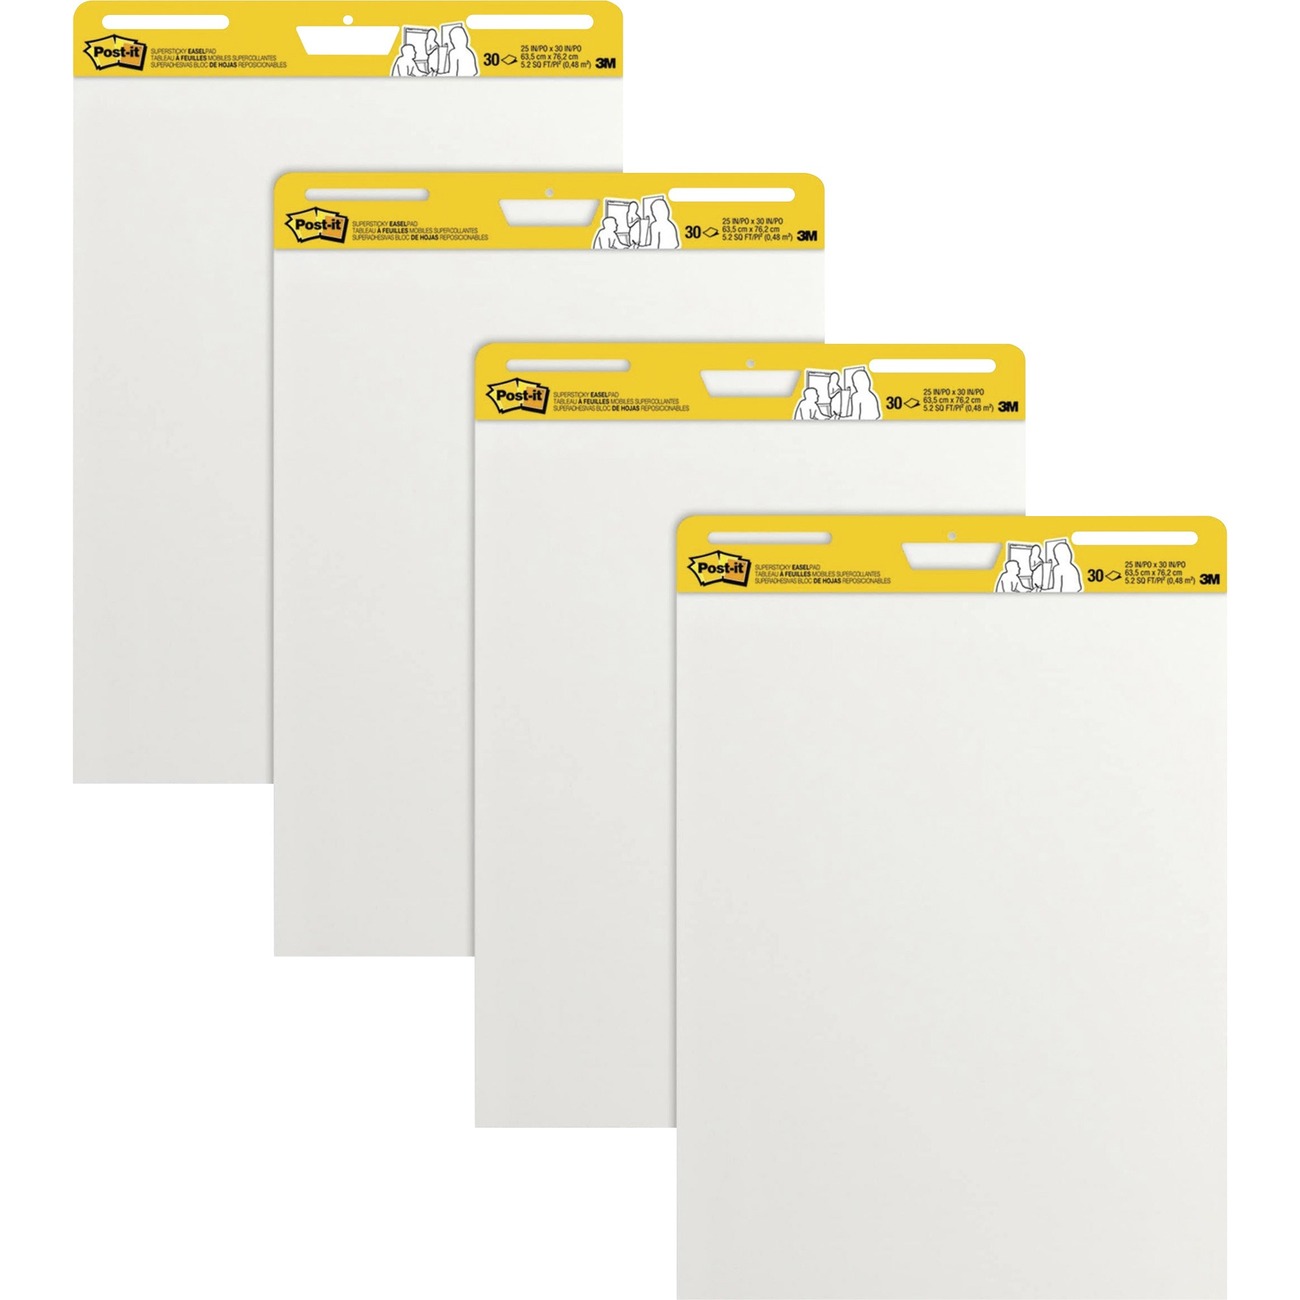 Post-it Super Sticky Easel Pad Wall Pad, 20 in x 23 in, 20 Sheets